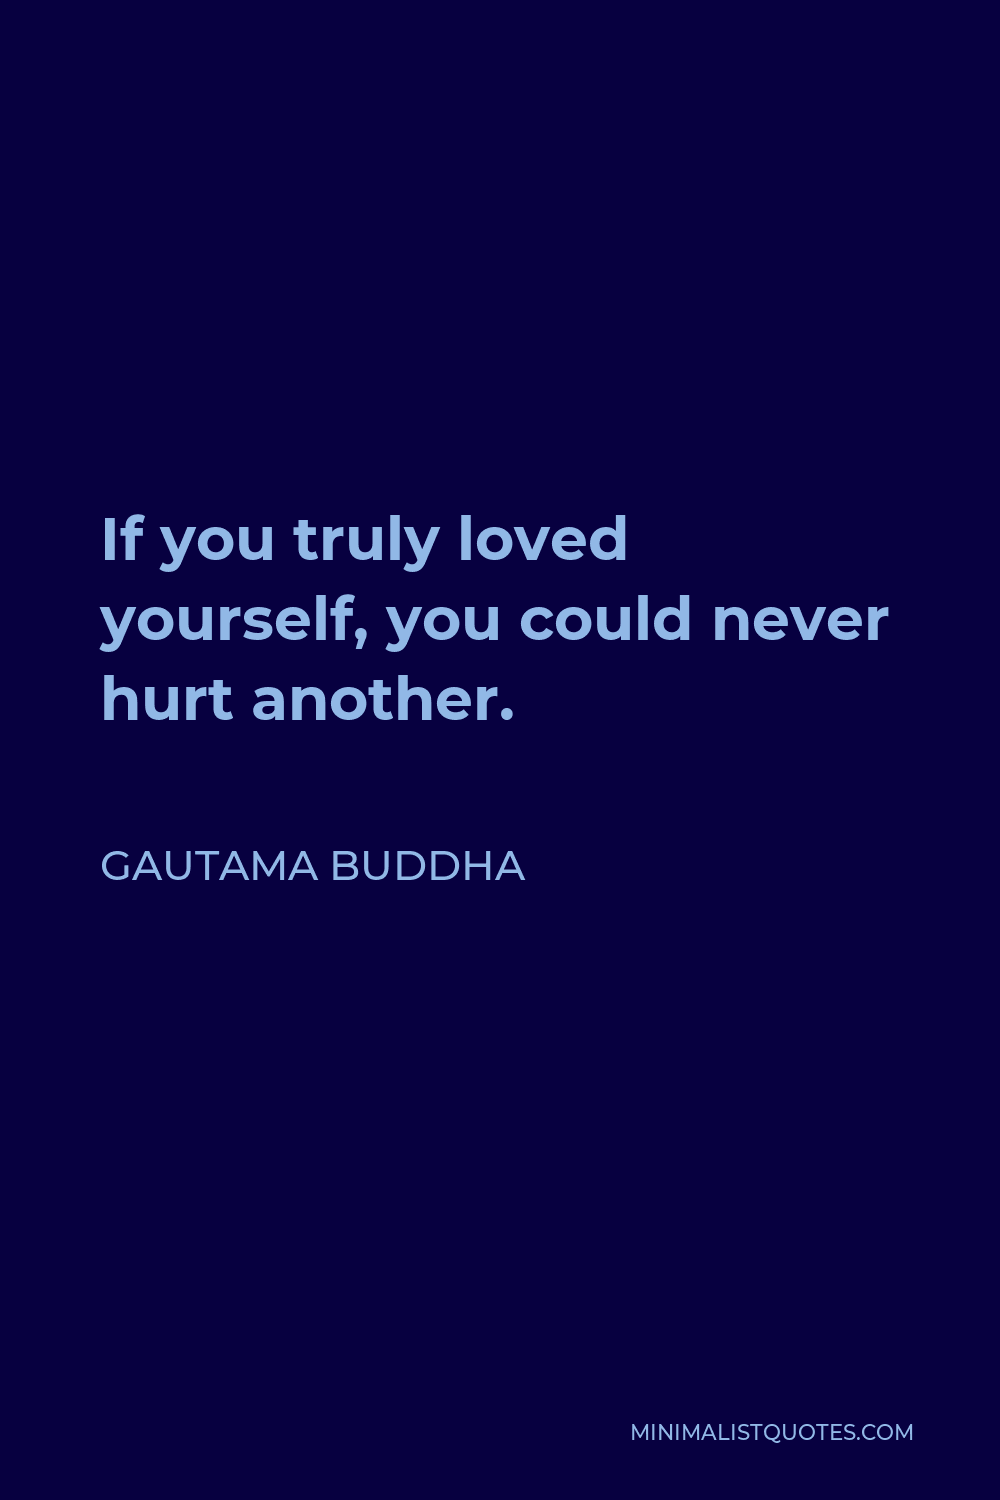 Gautama Buddha Quote - If you truly loved yourself, you could never hurt another.